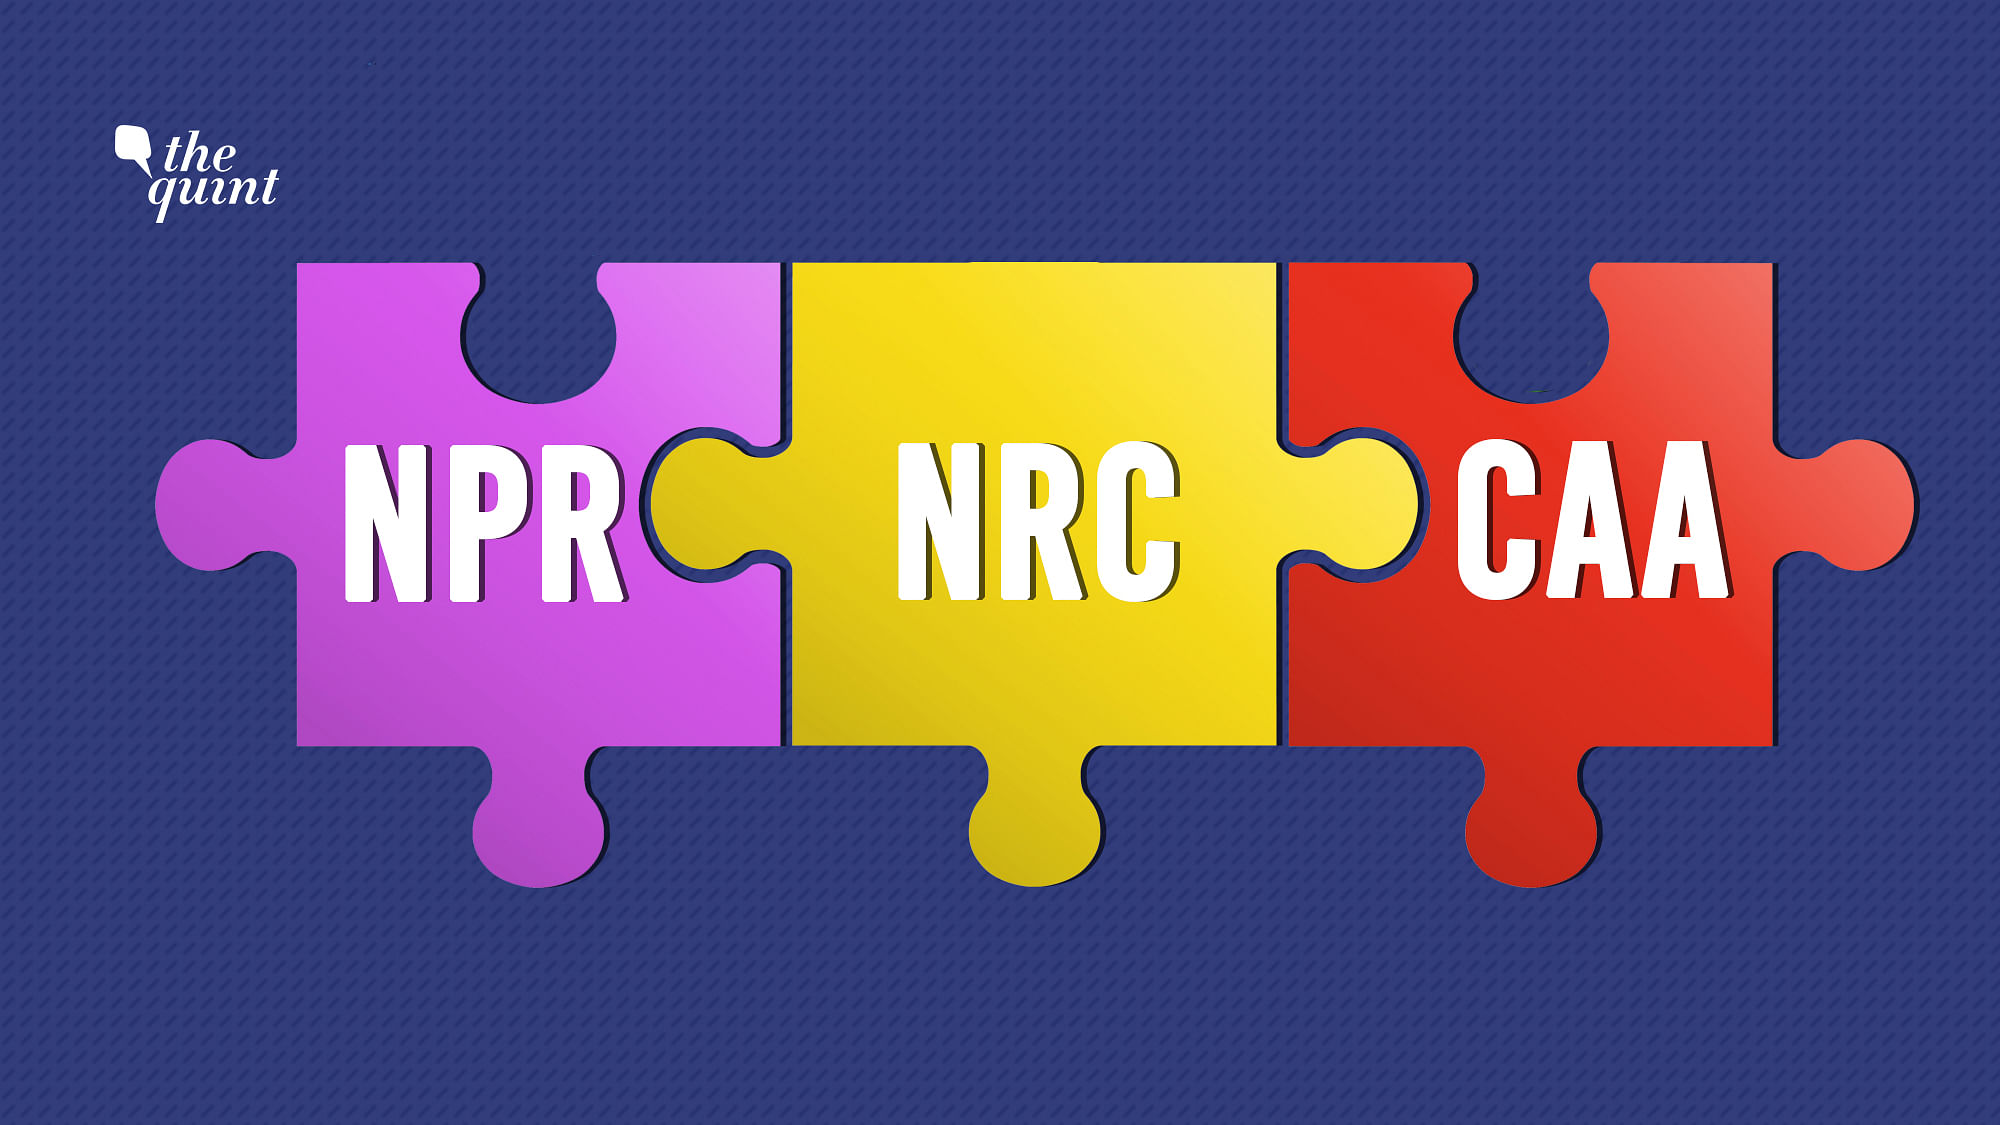 The recently passed CAA, the proposed NRC and the NPR have raised many questions and concerns.